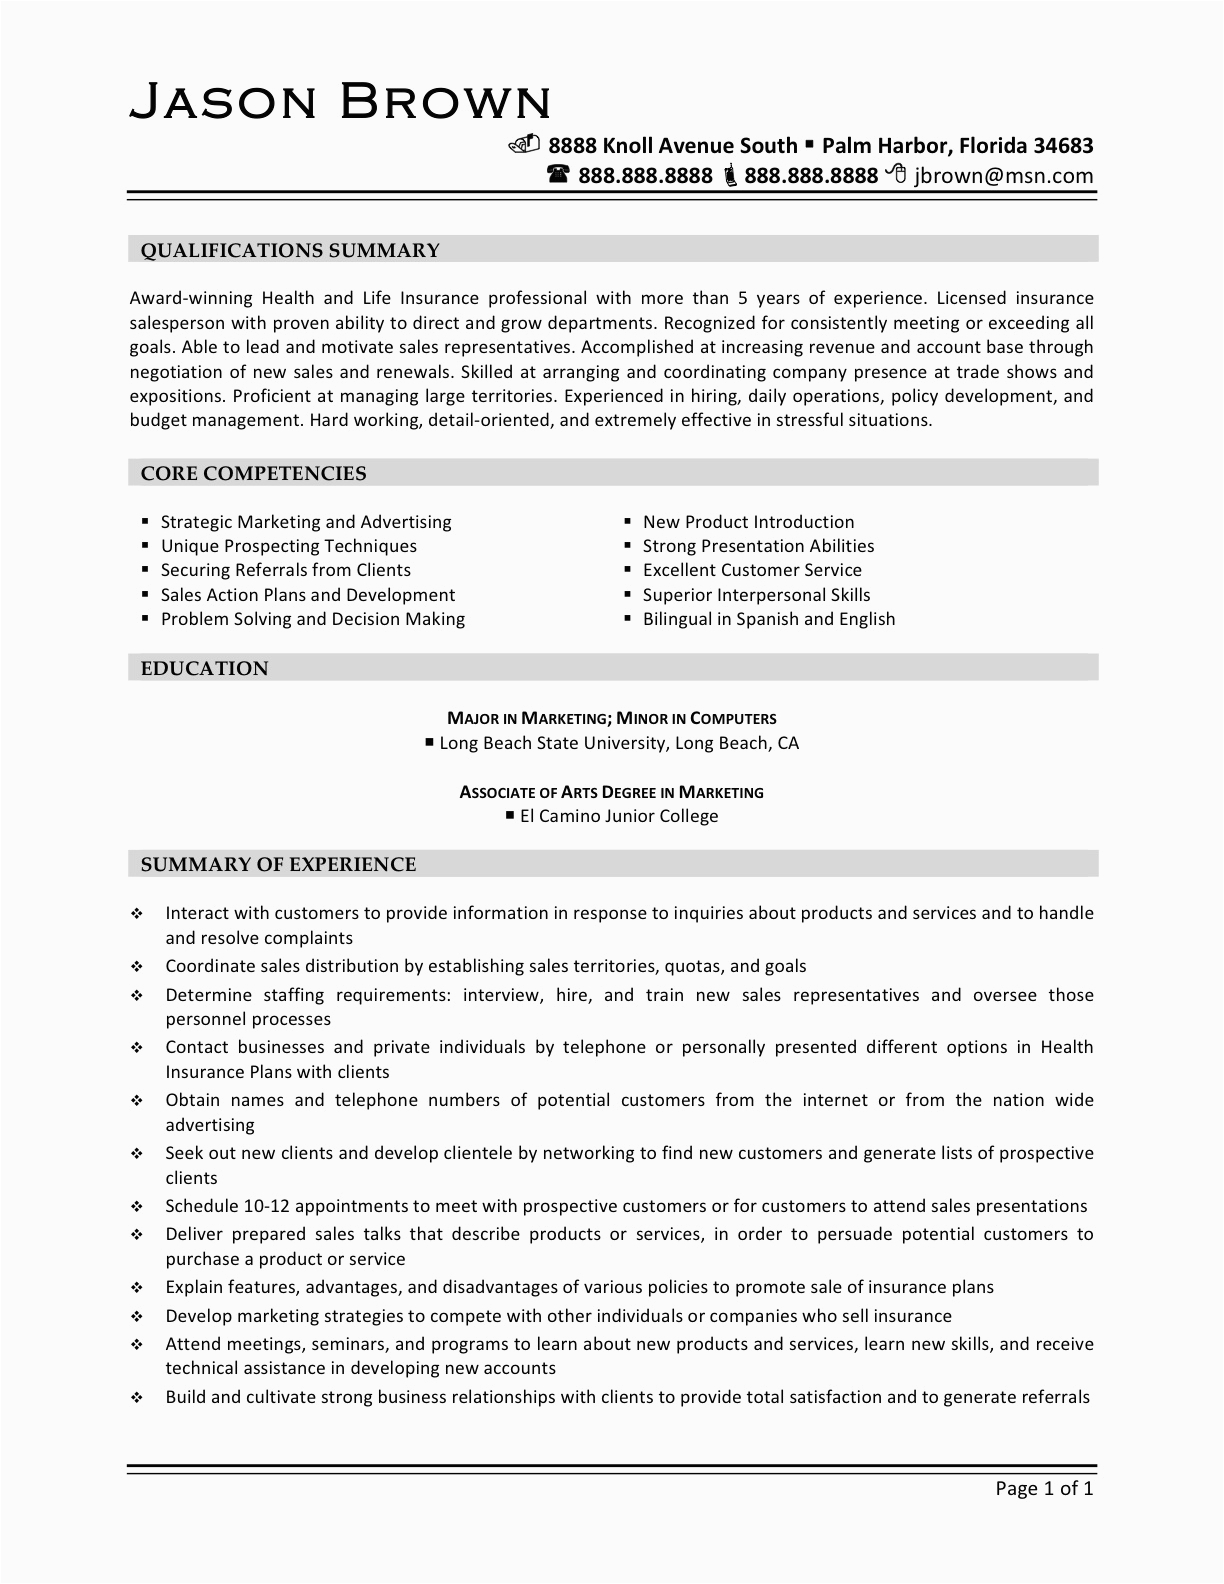 Free Resume Samples for Sales and Marketing 12 13 Best Resume Samples for Sales and Marketing